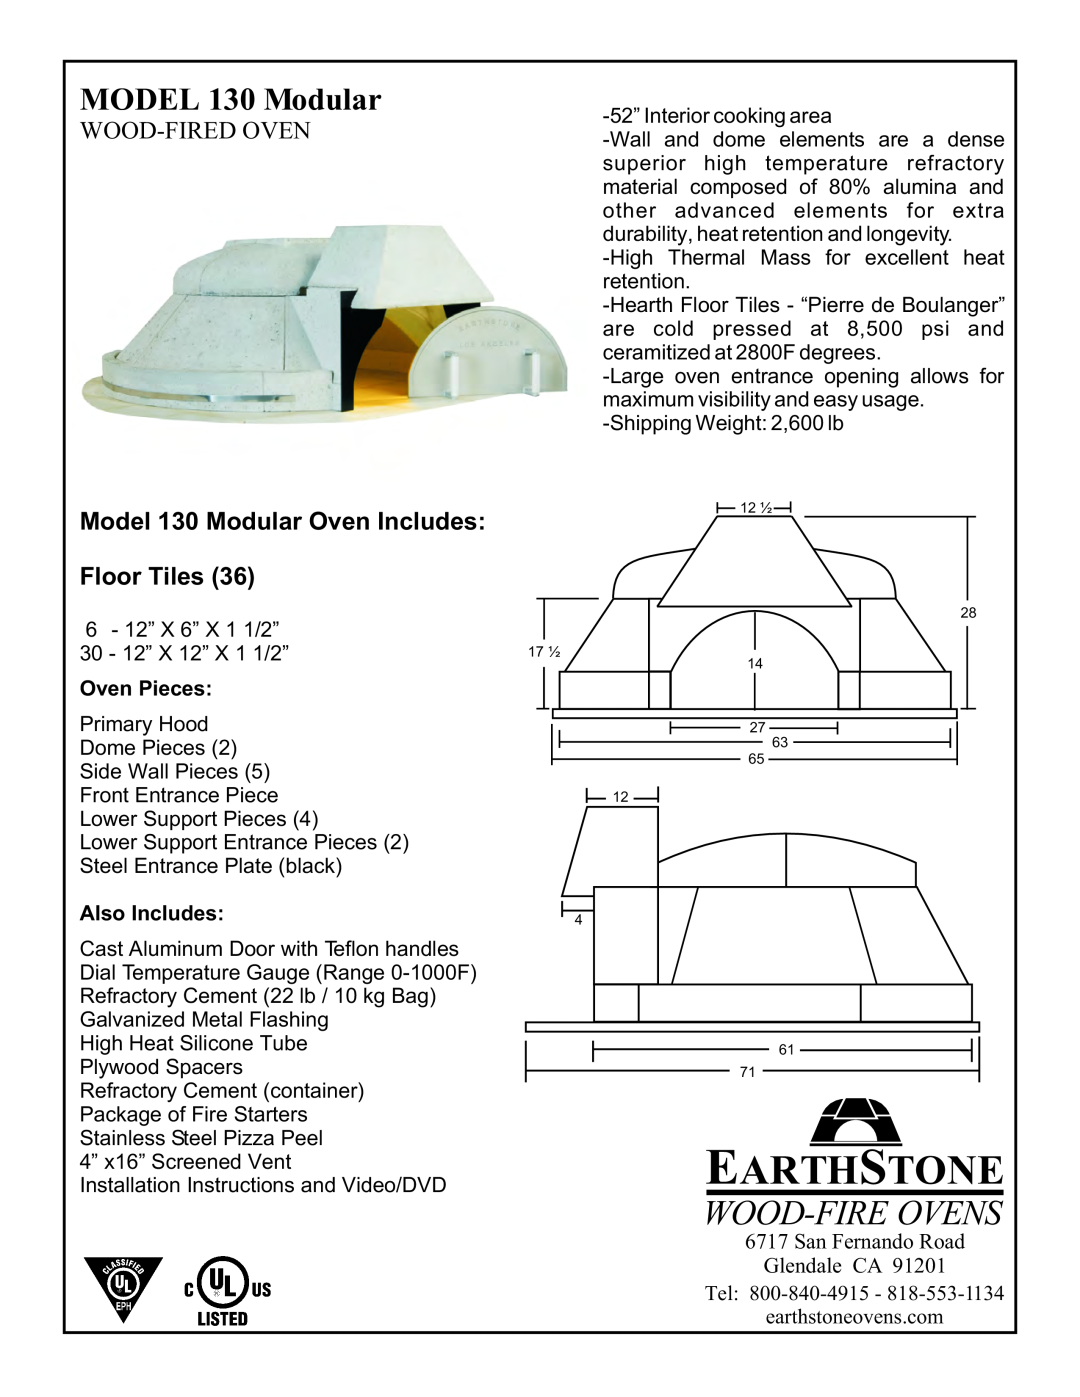 EarthStone installation instructions Earthstone, Wood-Fireovens, MODEL 130 Modular, Wood-Firedoven, Oven Pieces 